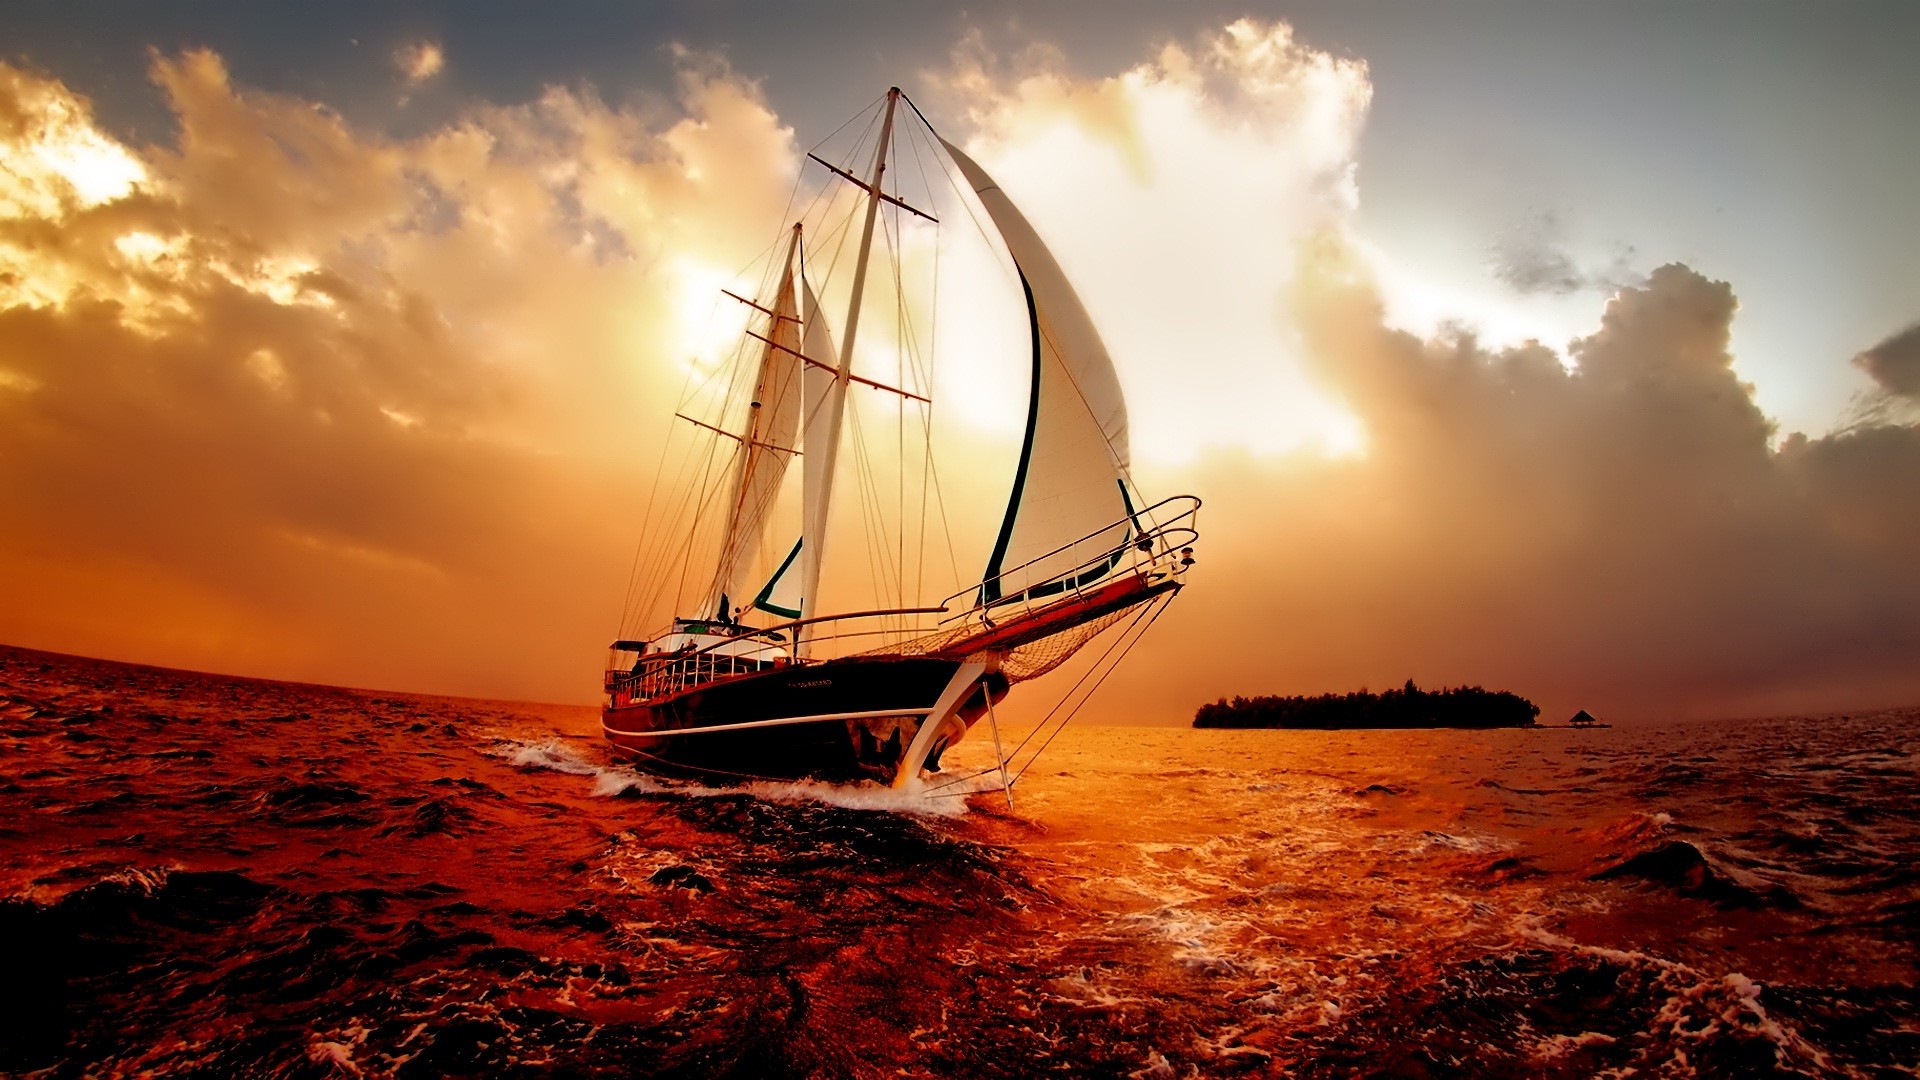 1920x1080 Amazing-boat-in-sea-marvelous-wallpapers 101 Awesome Wallpapers To Download